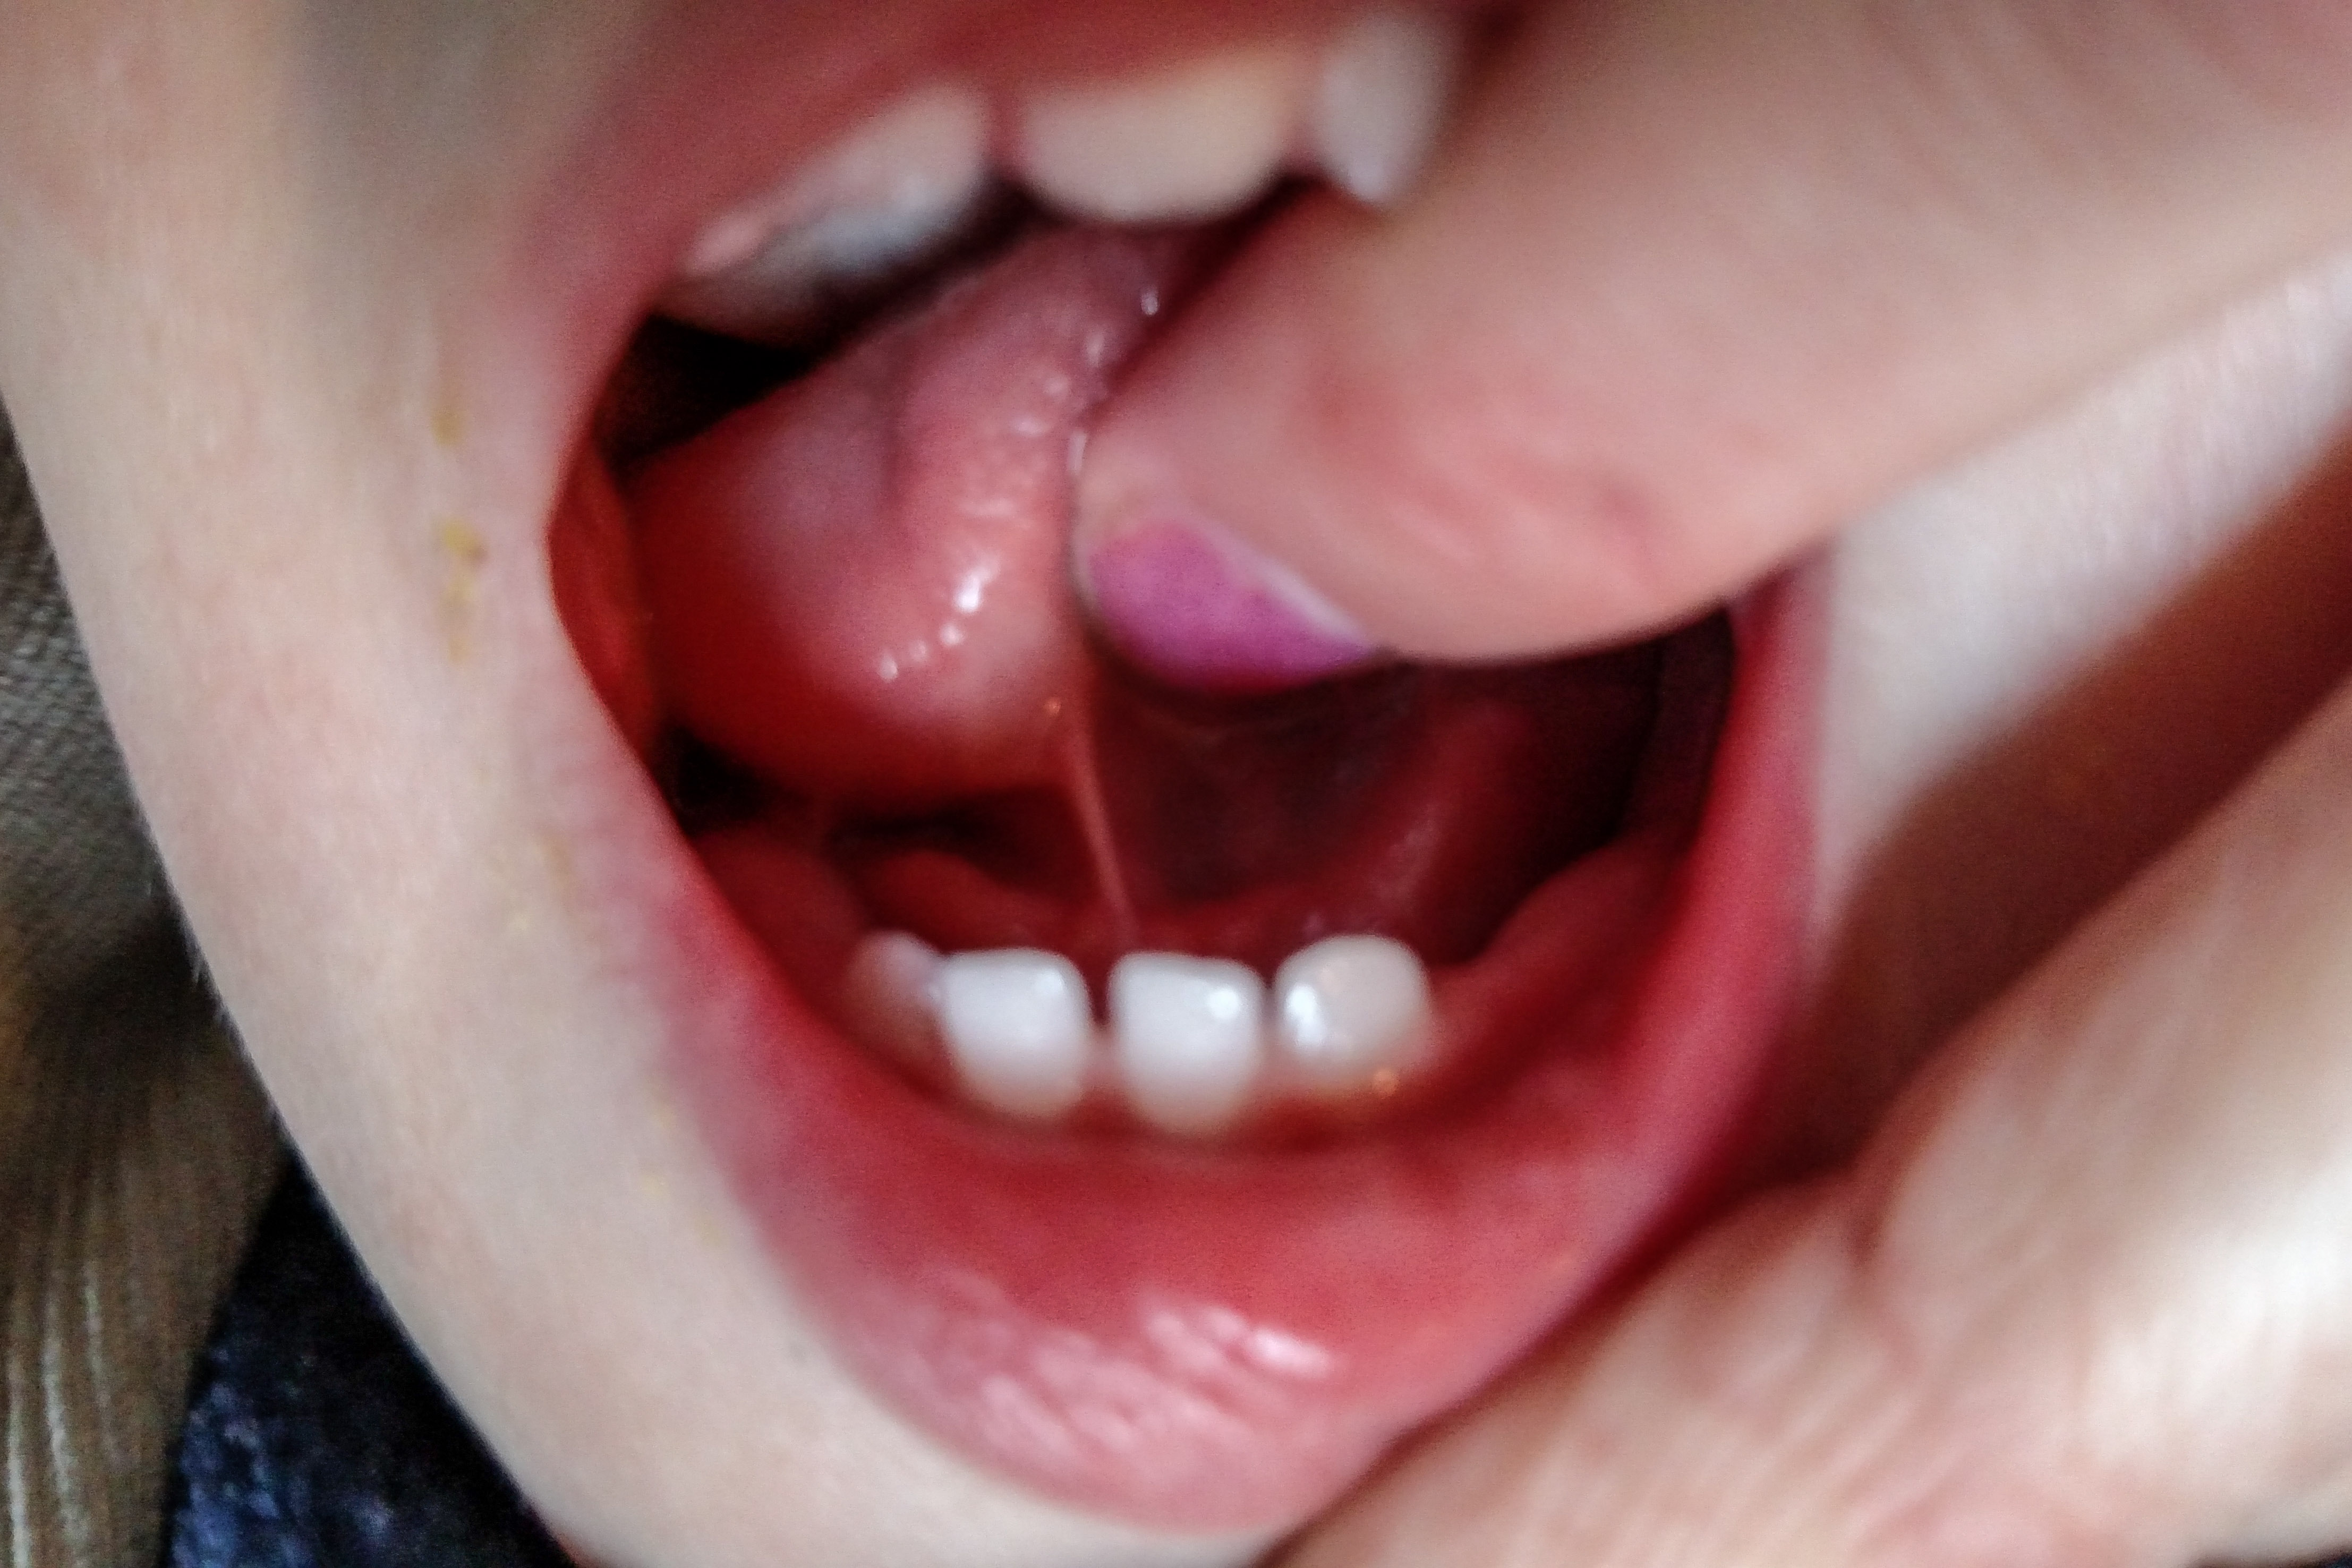 Lip & Tongue Tie in Newborns and Toddlers